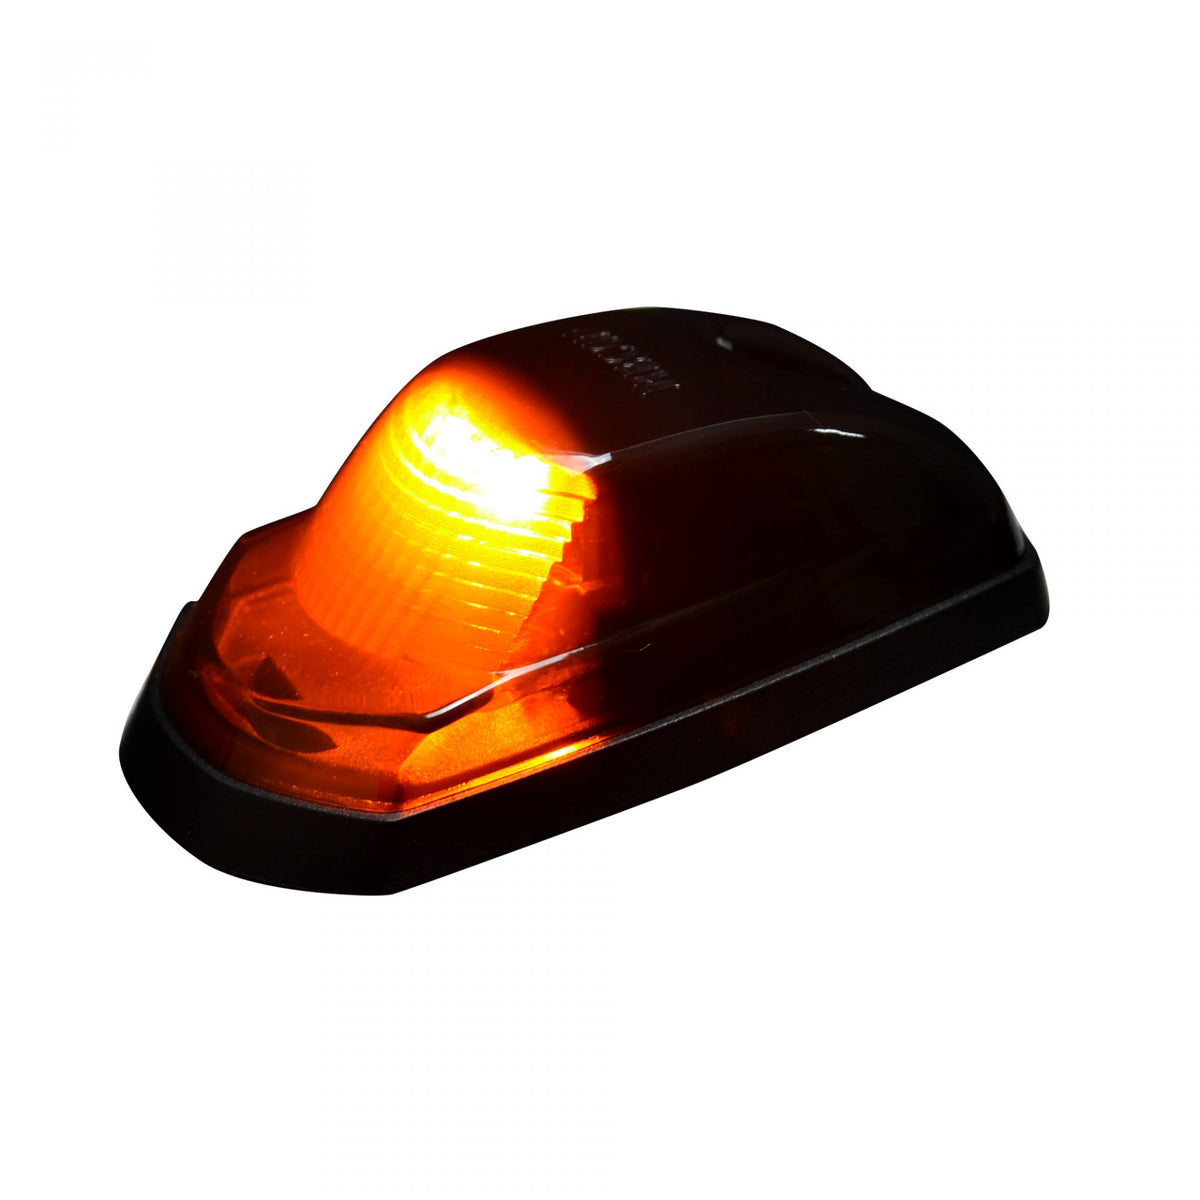 ord Super Duty 17-19 Single Cab Light High Power LED Smoked Lens in Amber